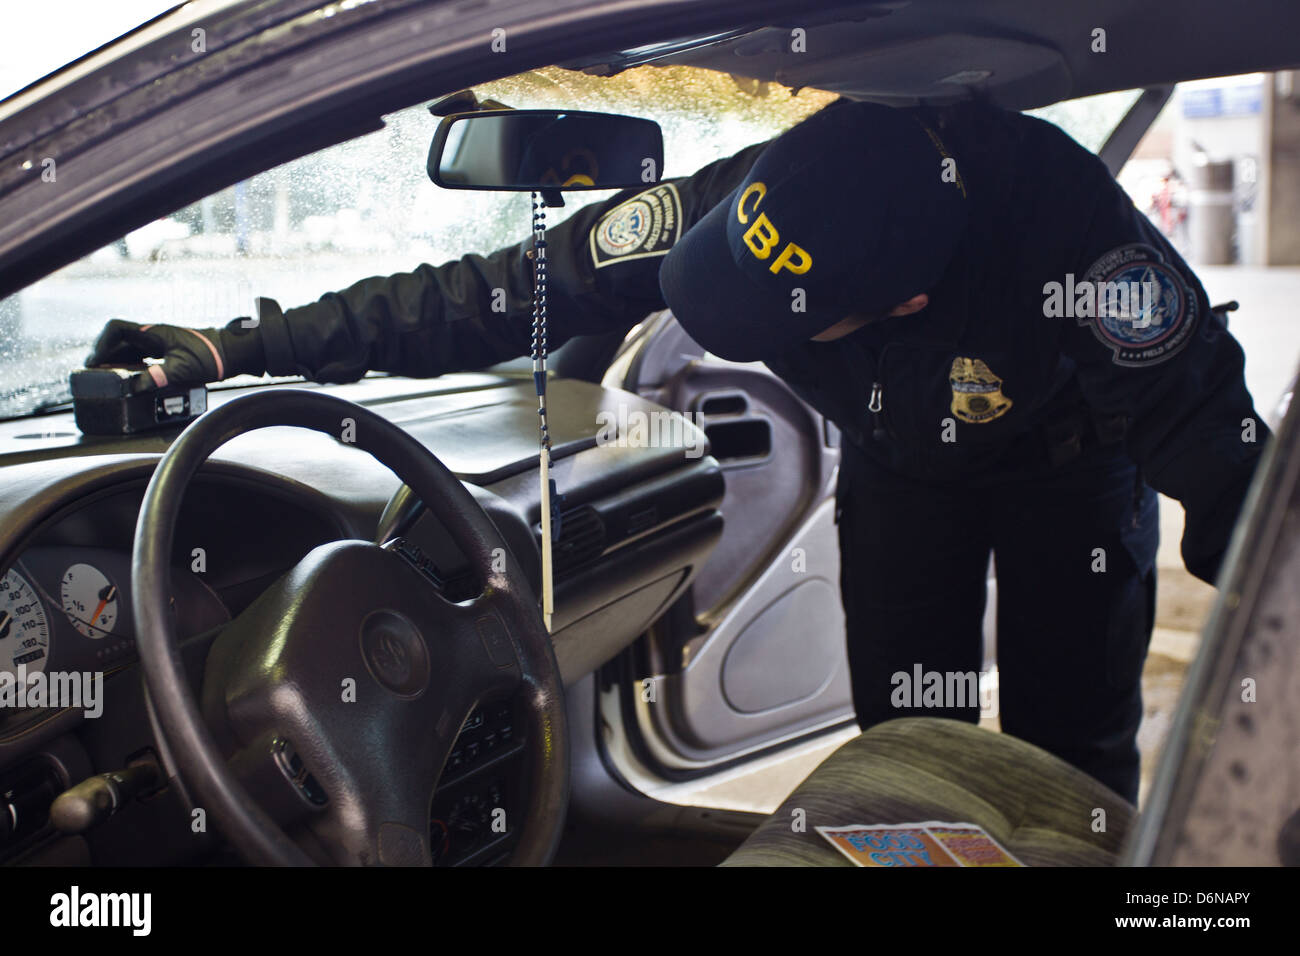 A US Customs and Border Protection officer uses a contraband detection device known as a buster to inspect a vehicle at the San Luis border crossing February 16, 2012 in San Luis, AZ. Stock Photo